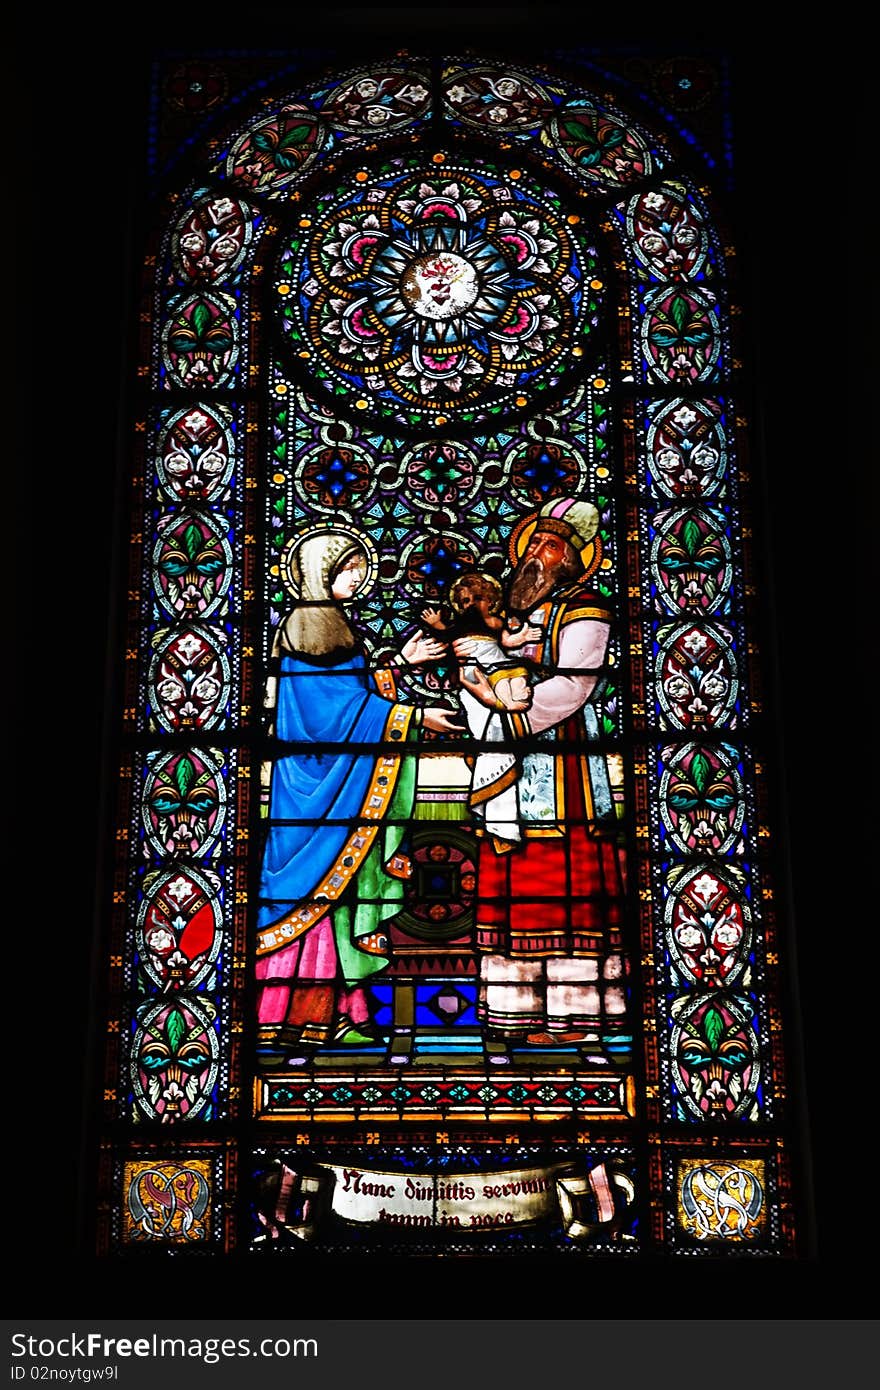 Fragment of stained glass in Montserrat monastery, Catalonia, Spain. Fragment of stained glass in Montserrat monastery, Catalonia, Spain